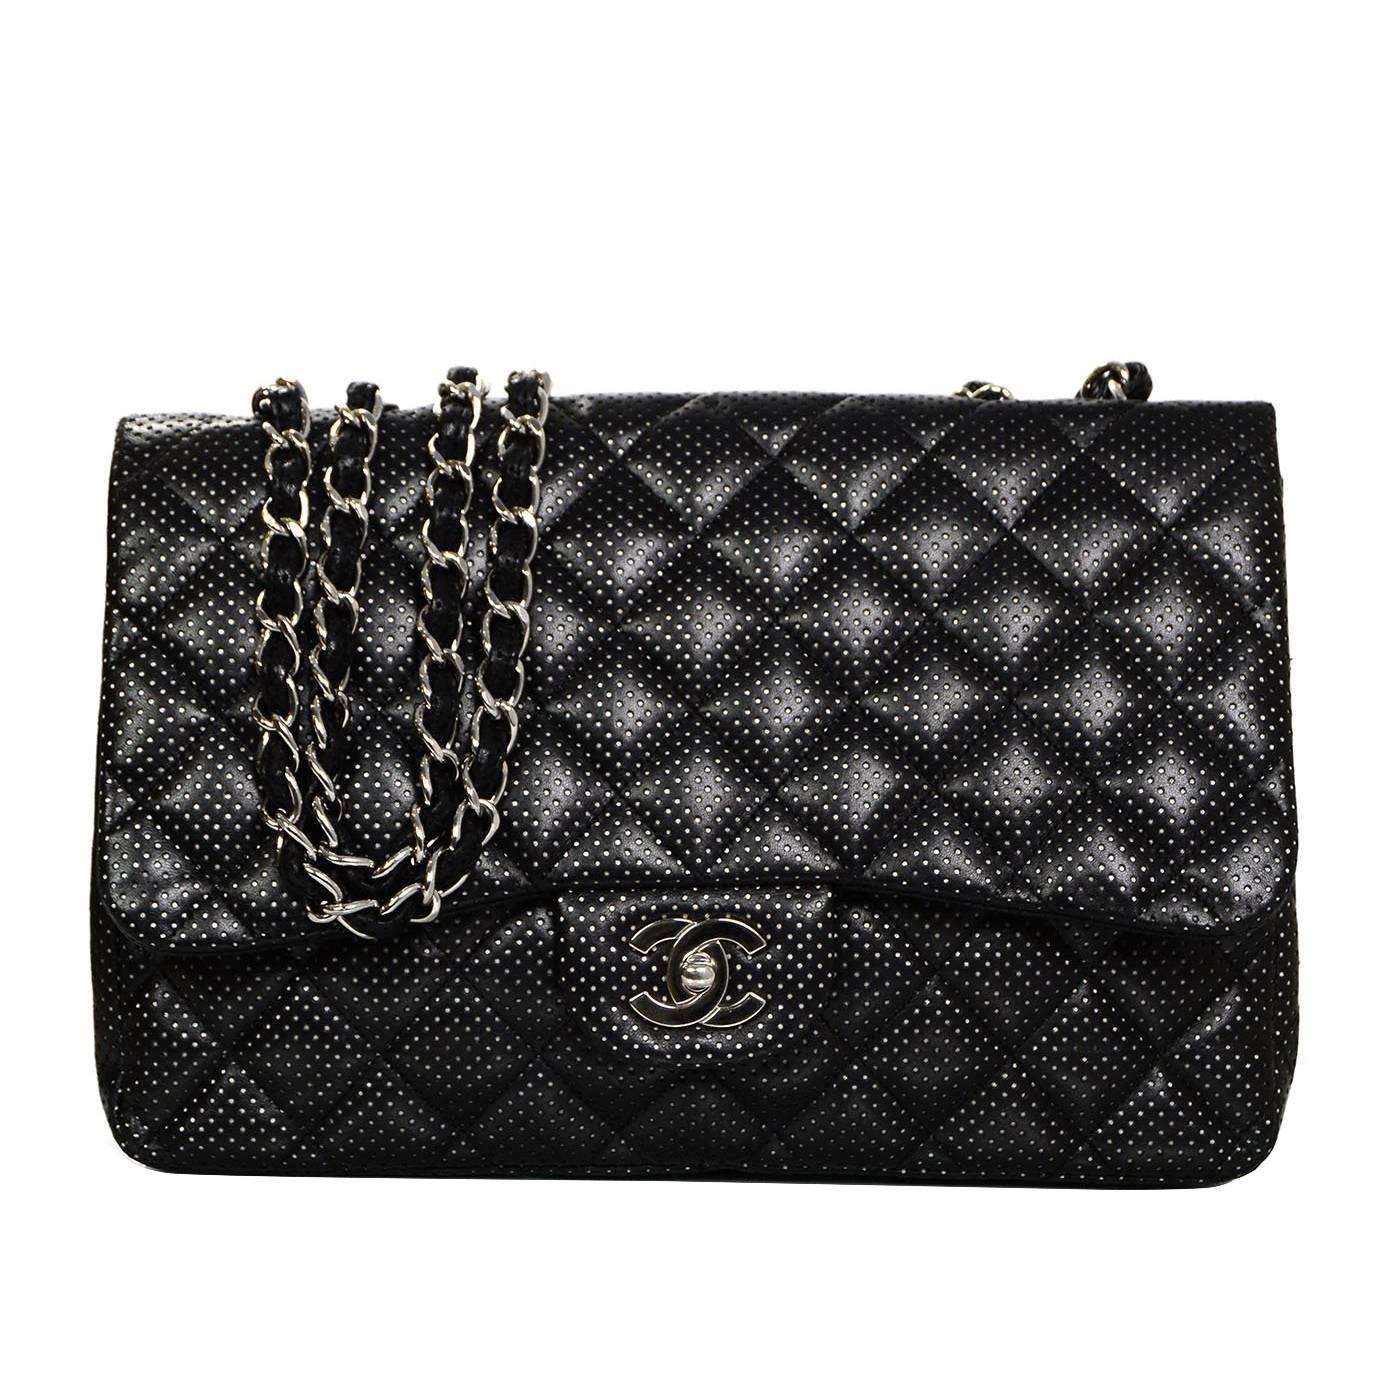 Chanel Black Perforated Jumbo Quilted Classic Flap Bag SHW